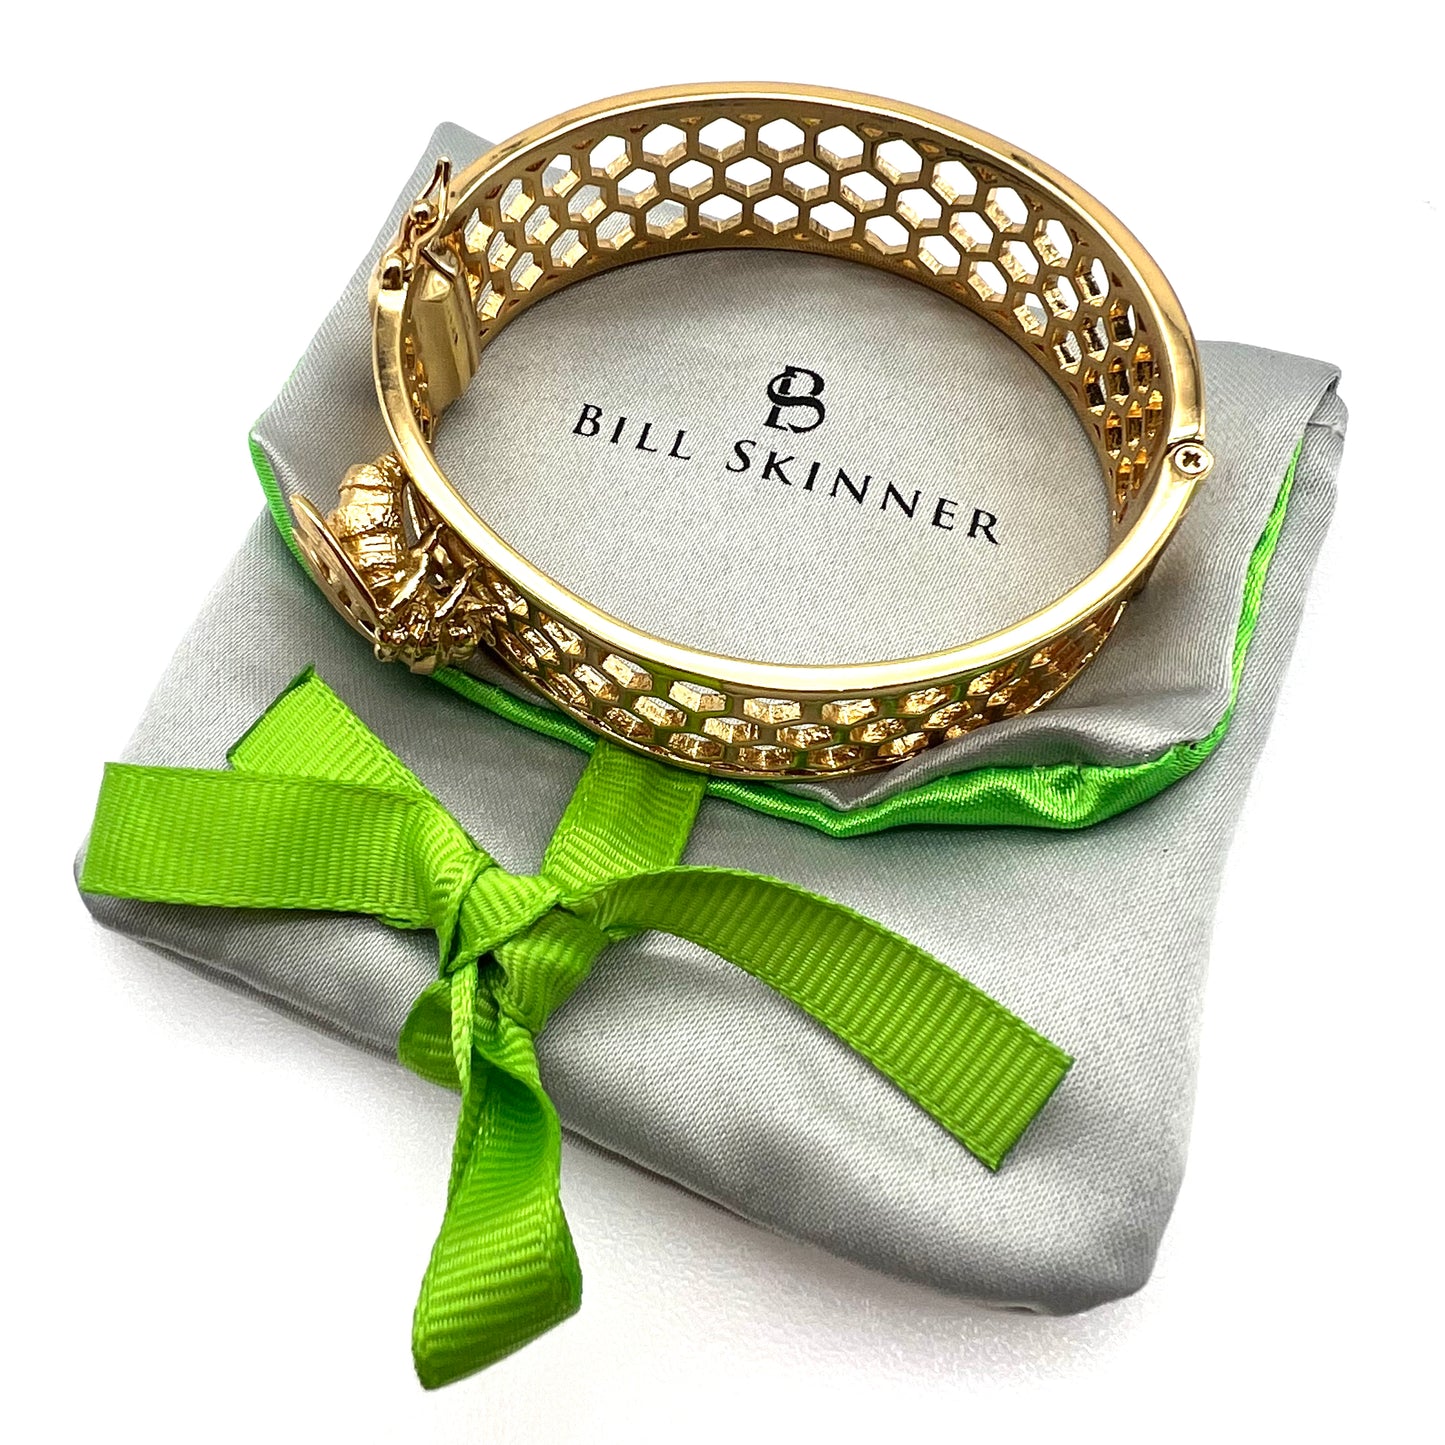 Bill Skinner 18ct Gold Plated Bee and Honeycomb Bangle (Future Collectible)